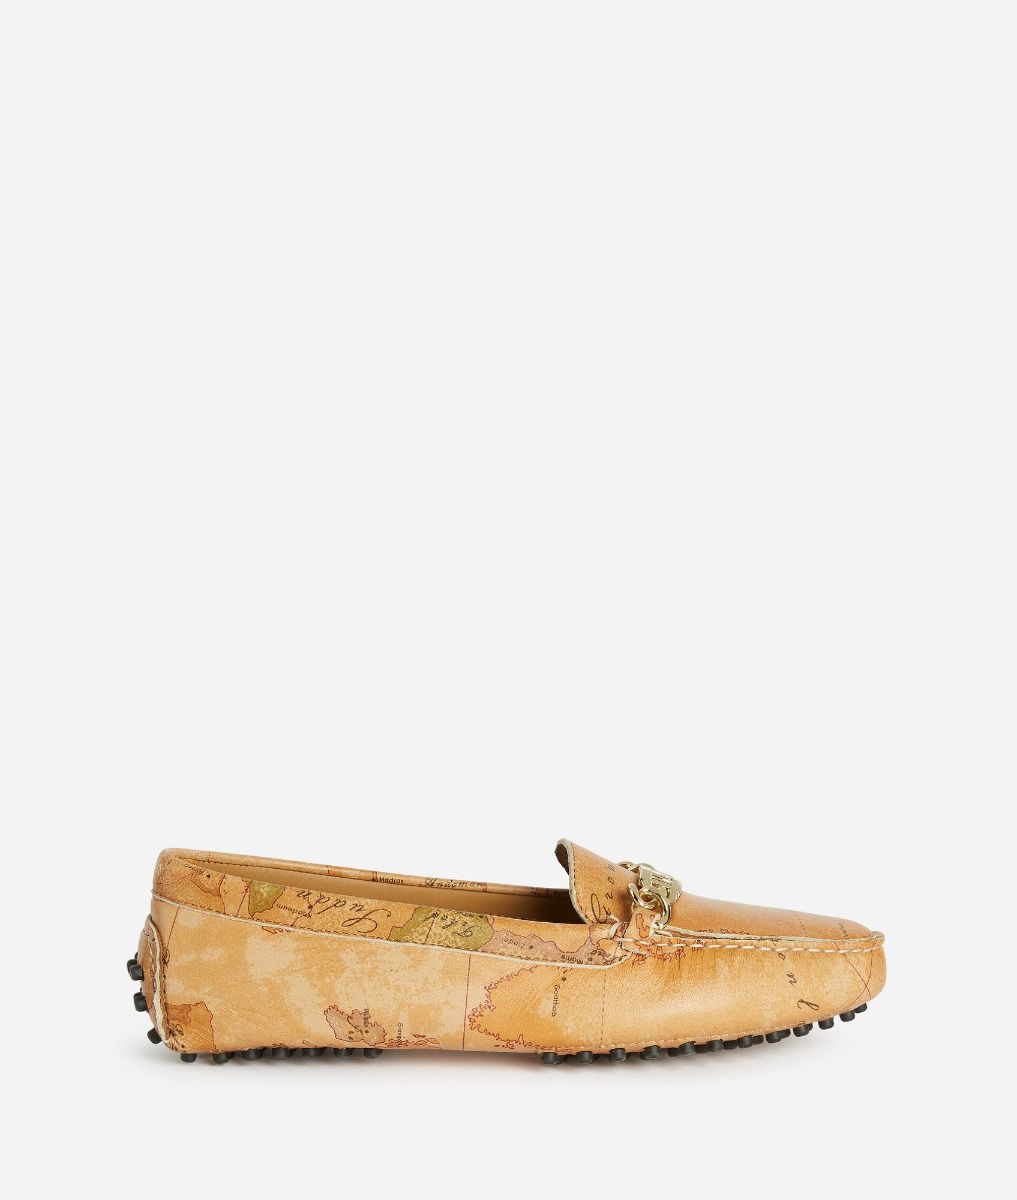 Nappa leather loafers with horsebit Naturals,front